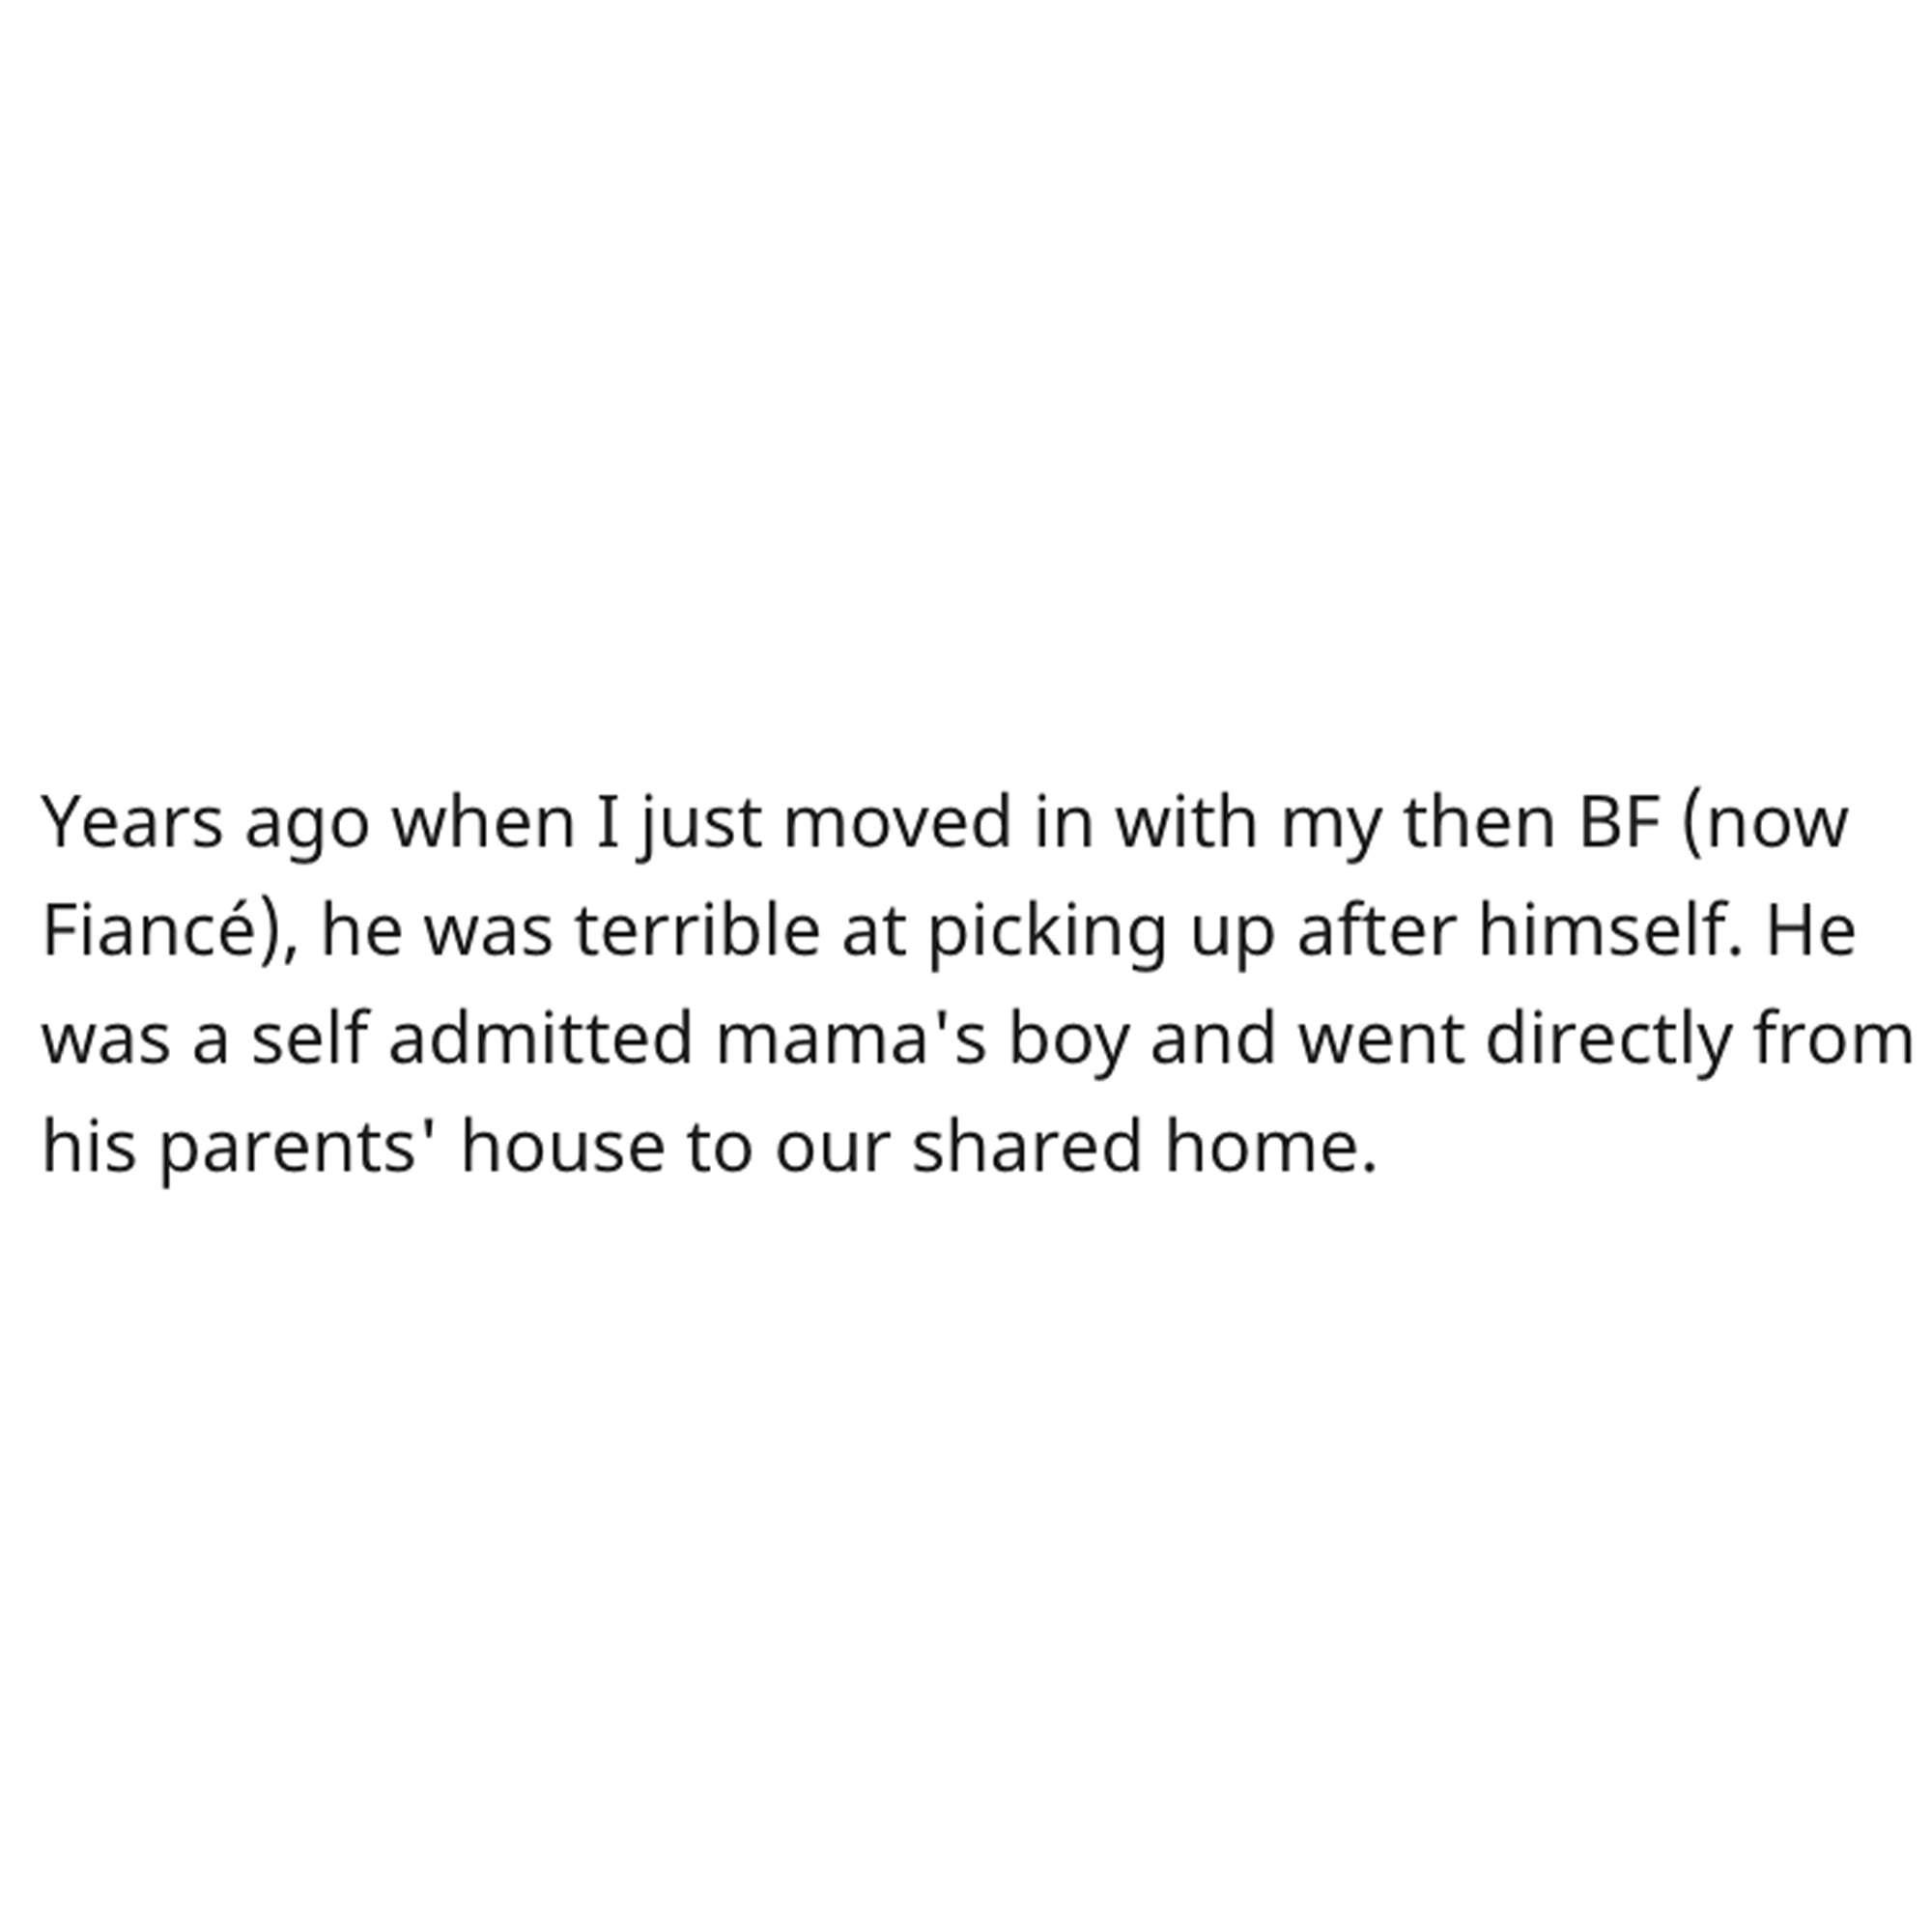 Cleaning Contest Reddit Story - angle - Years ago when I just moved in with my then Bf now Fianc, he was terrible at picking up after himself. He was a self admitted mama's boy and went directly from his parents' house to our d home.